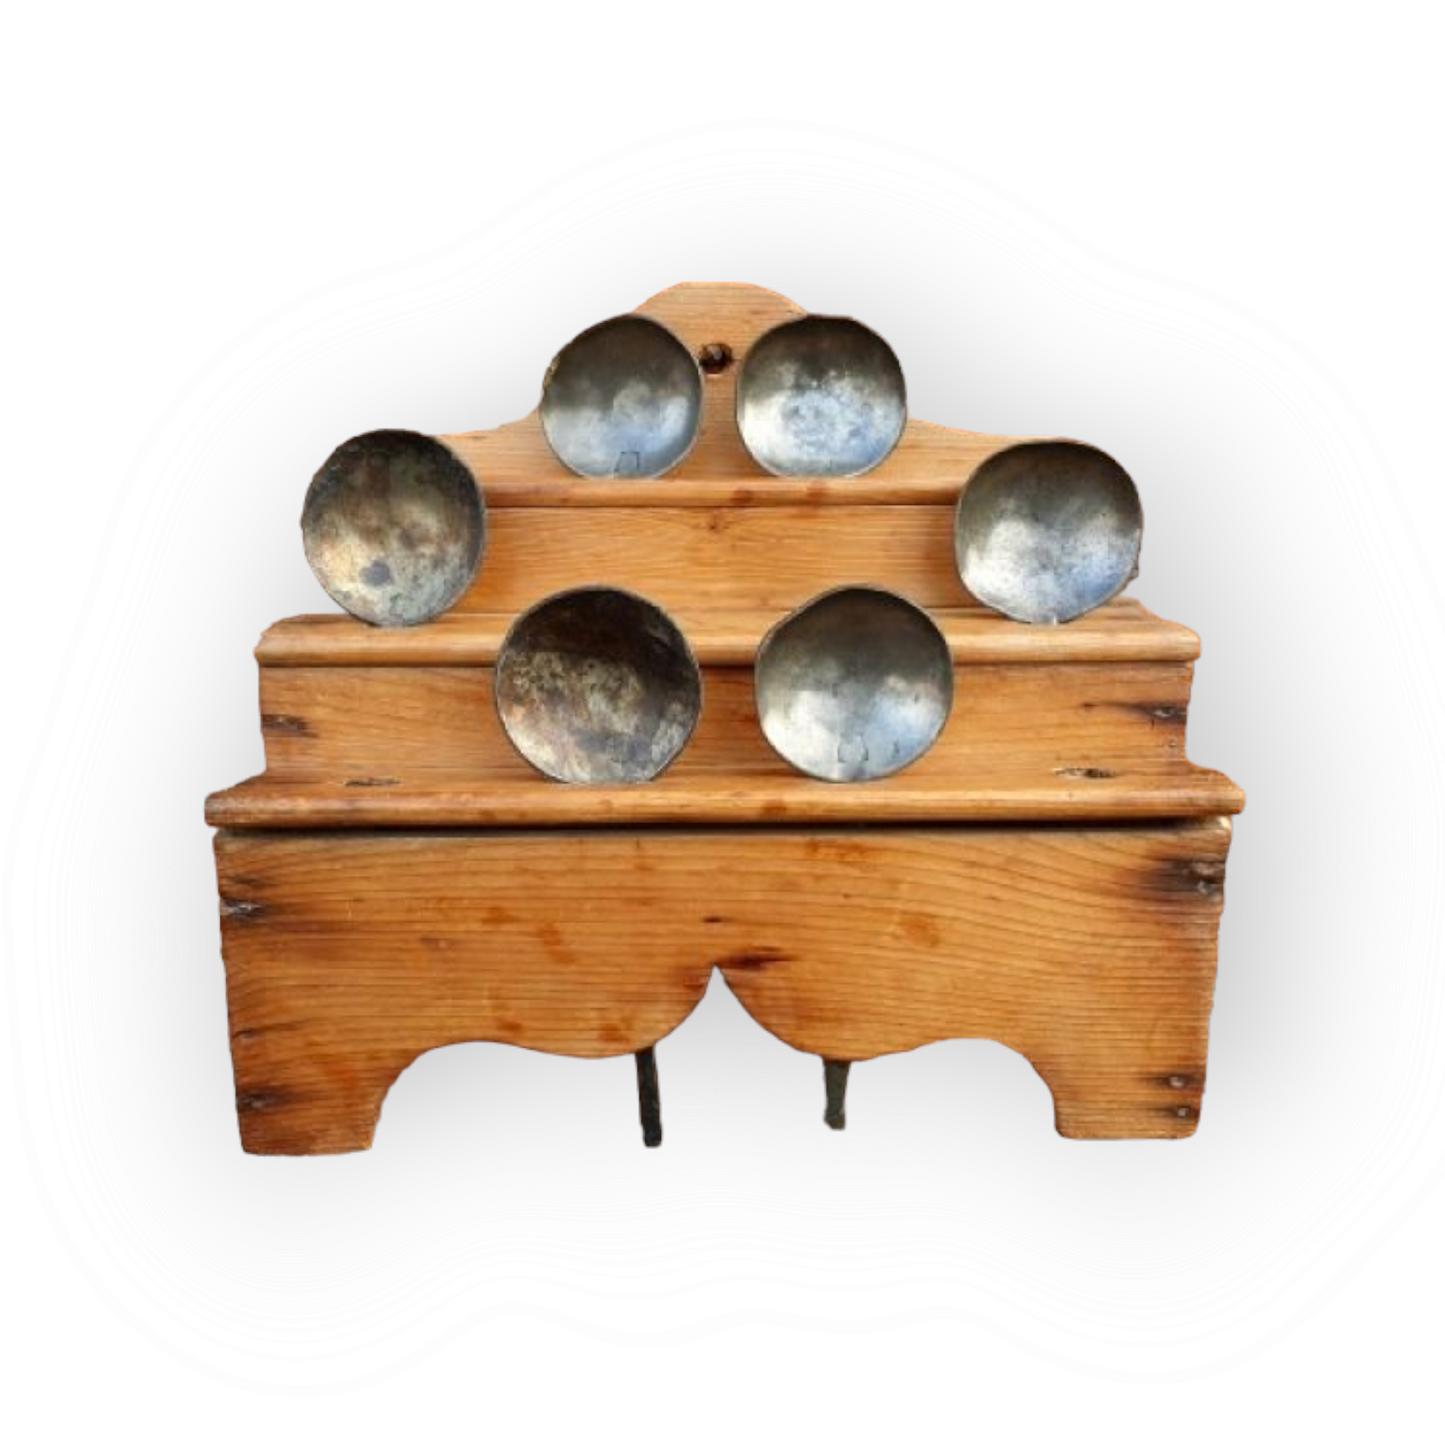 19th Century Welsh Antique Pine Stepped Spoon Rack